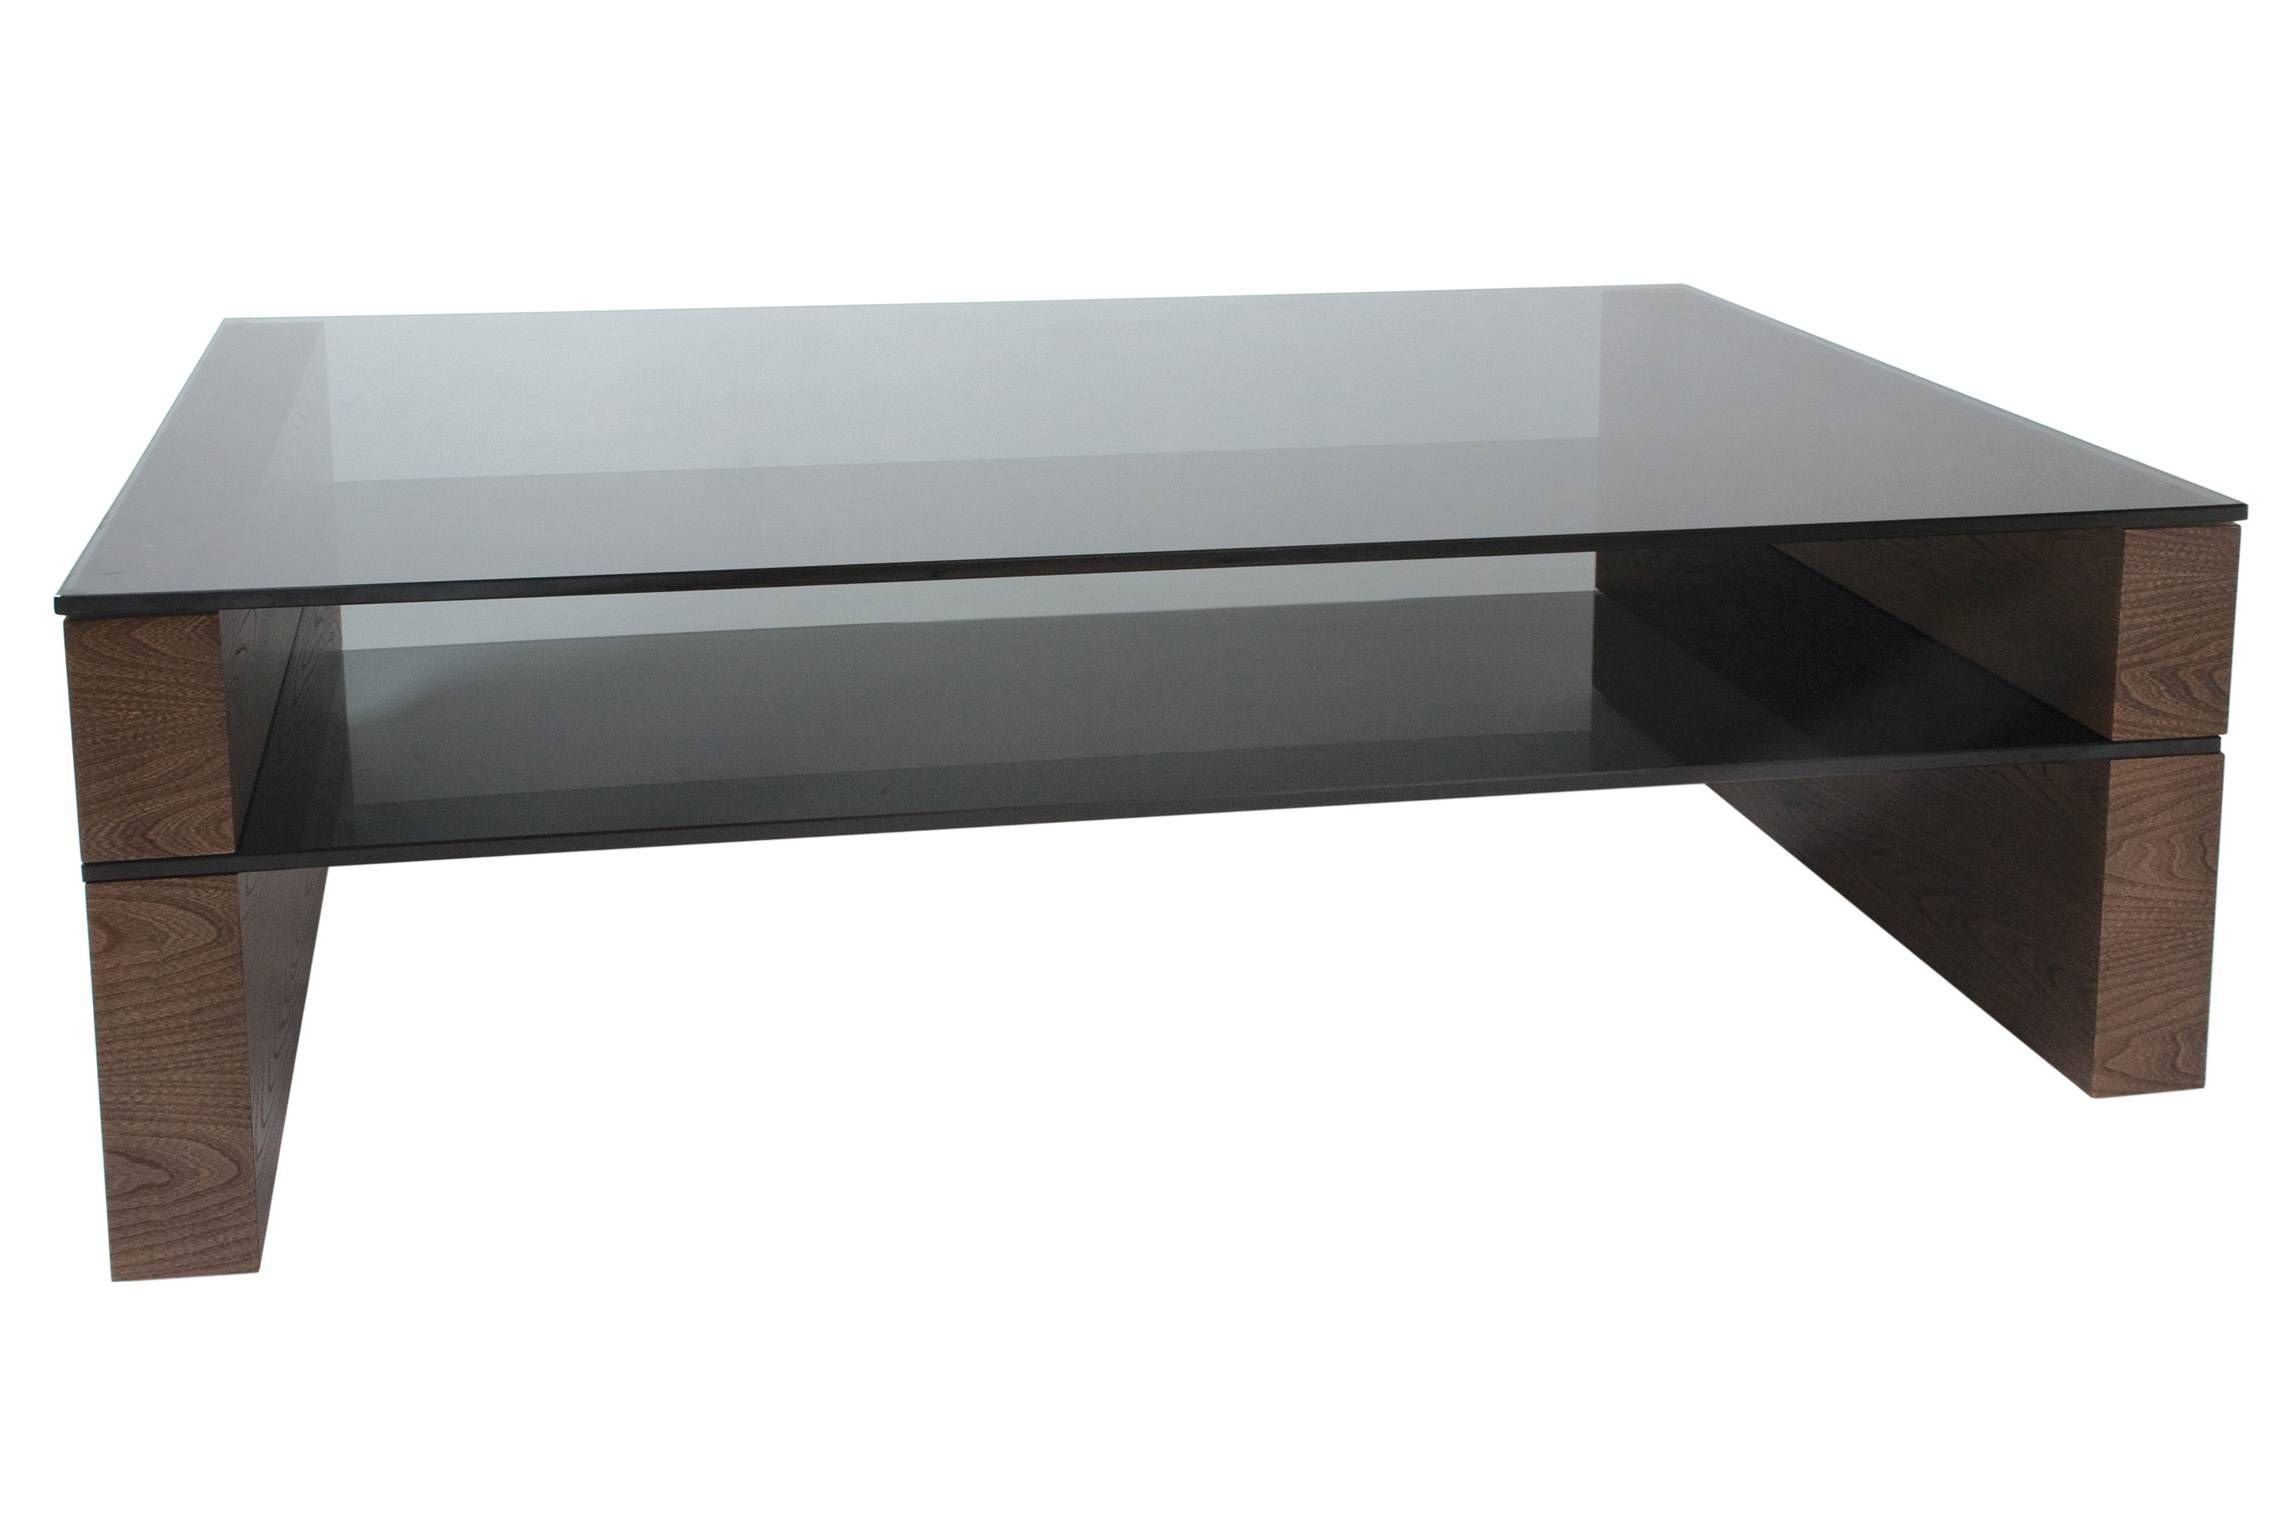 Coffee Table: Incredible Elephant Coffee Table Design Ideas With Elephant Coffee Tables With Glass Top (View 20 of 30)